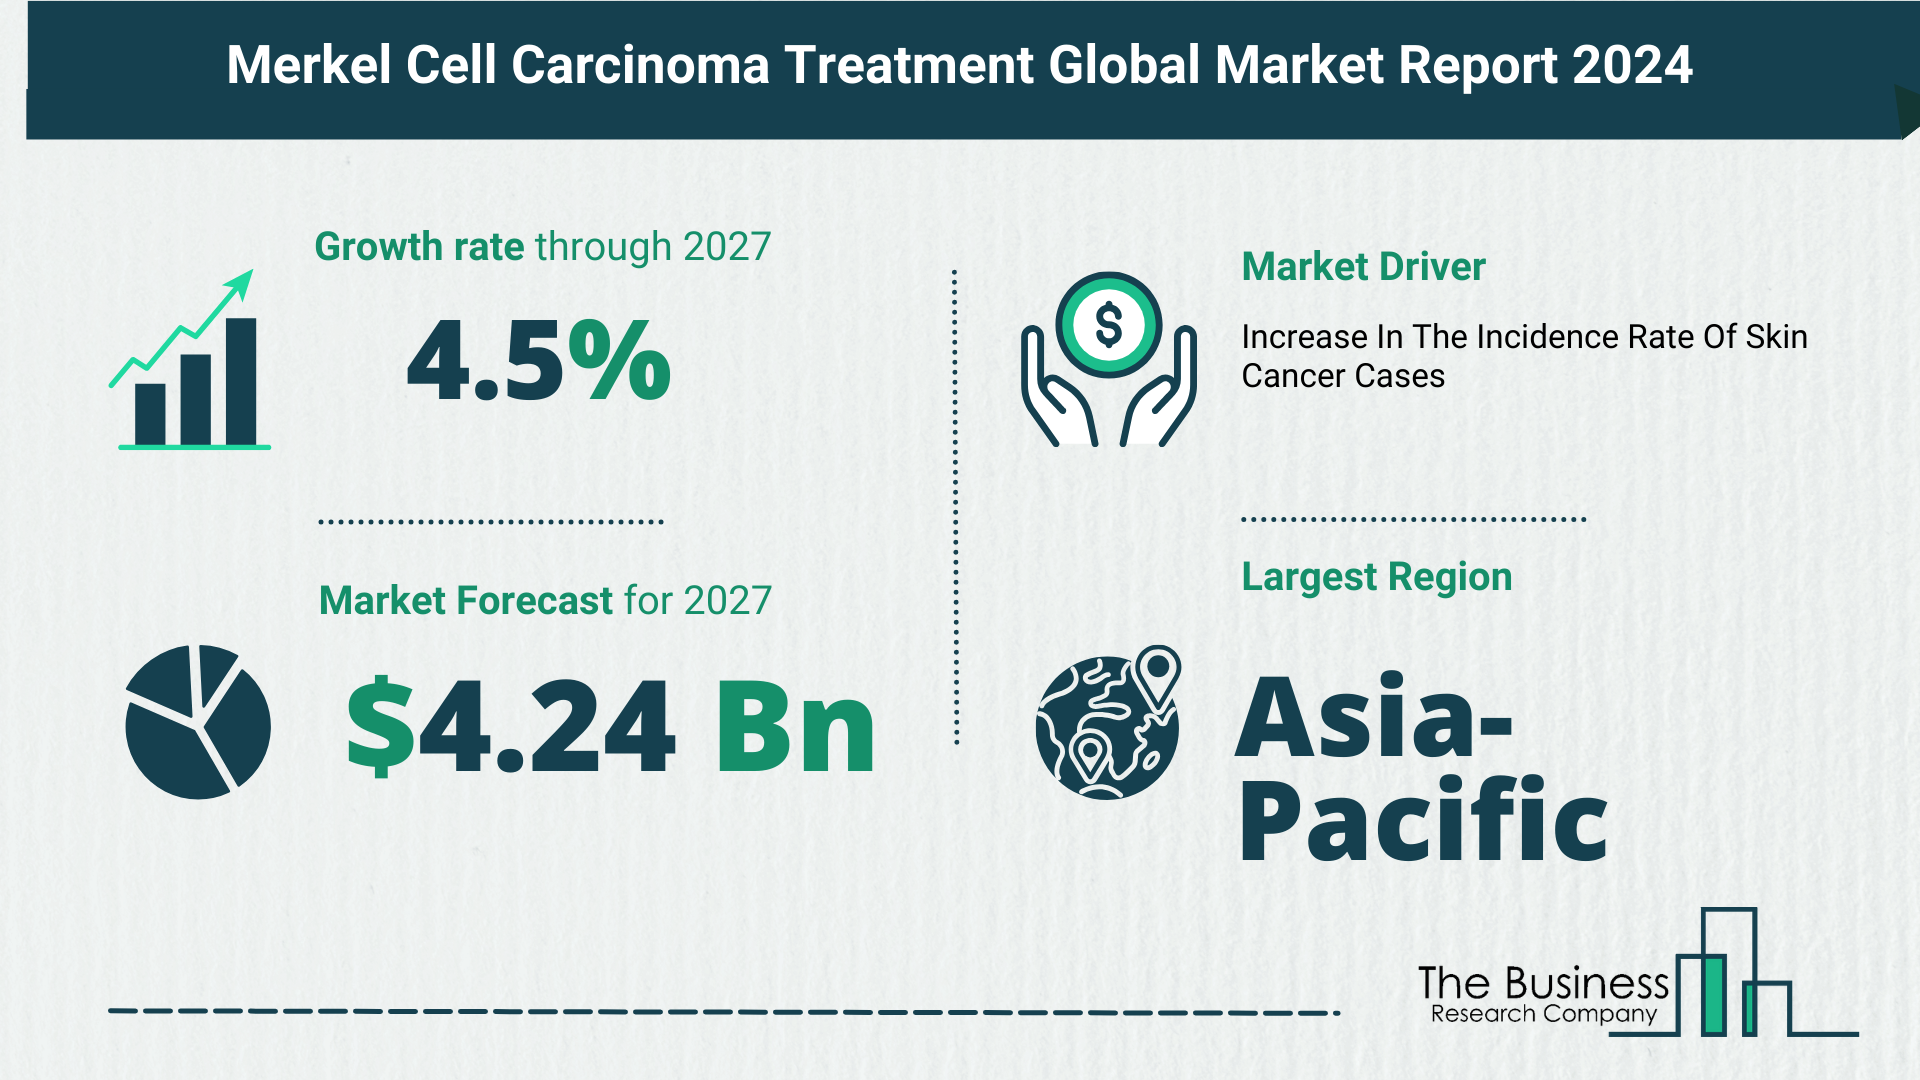 Global Merkel Cell Carcinoma Treatment Market Overview 2023: Size, Drivers, And Trends